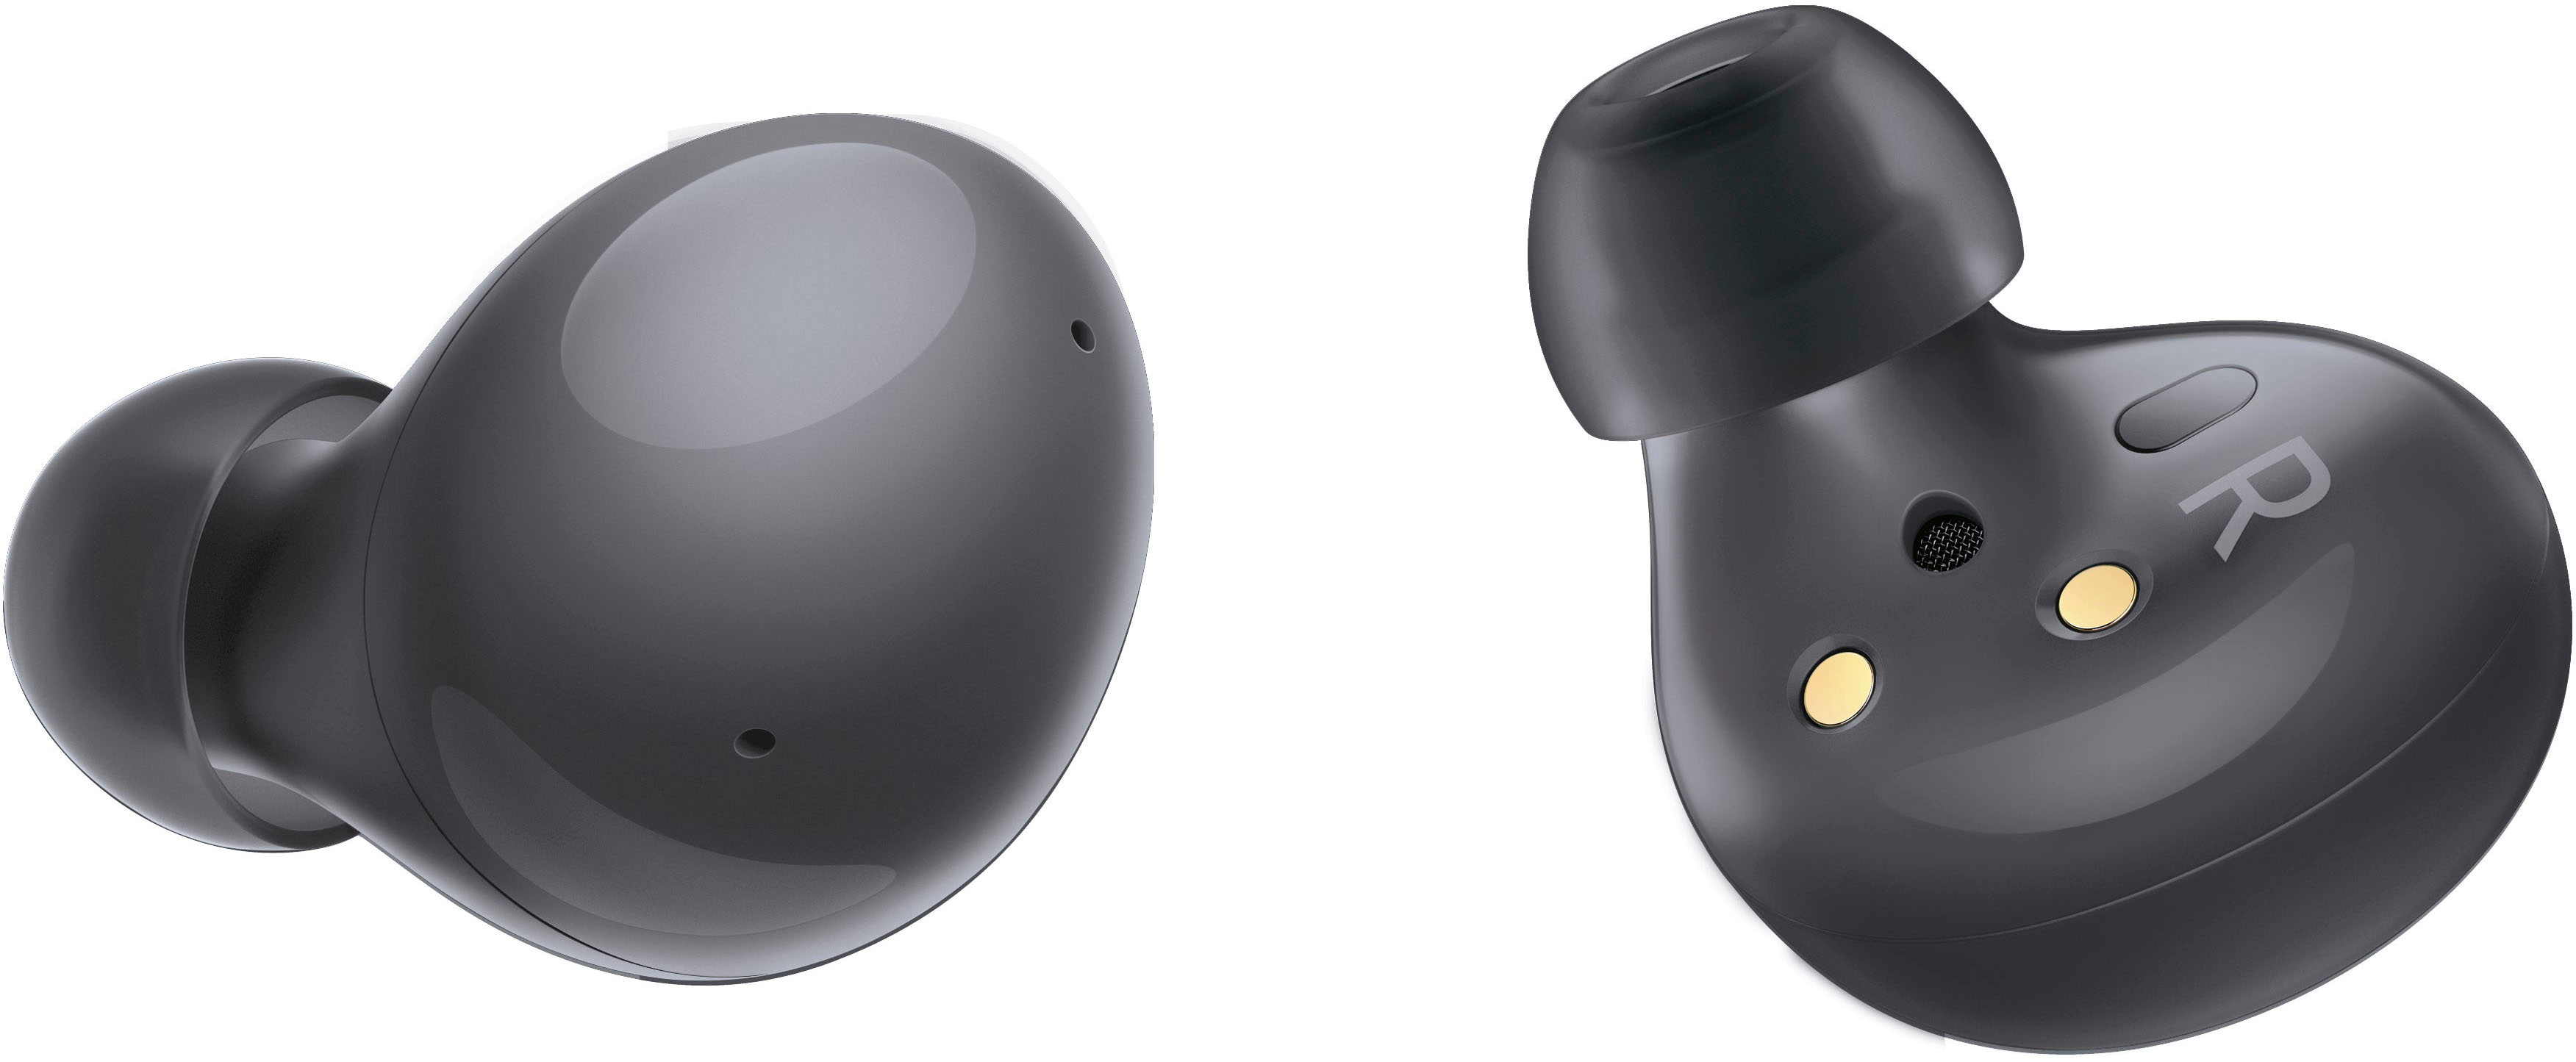 Questions and Answers: Samsung Galaxy Buds2 True Wireless Earbud